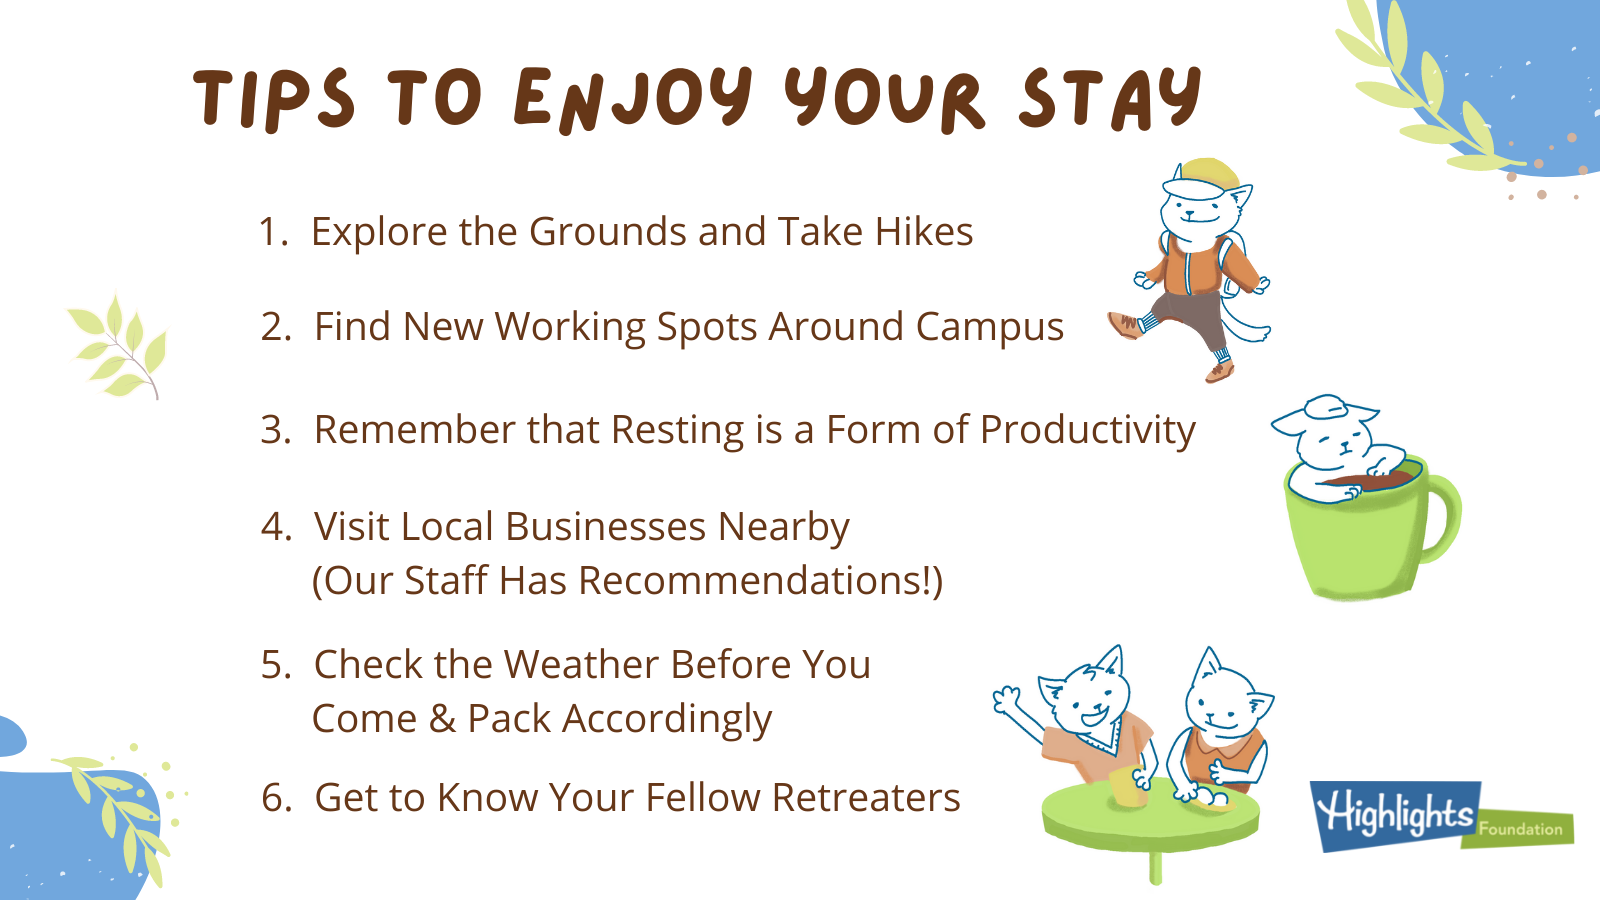 Tips to Enjoy Your Stay